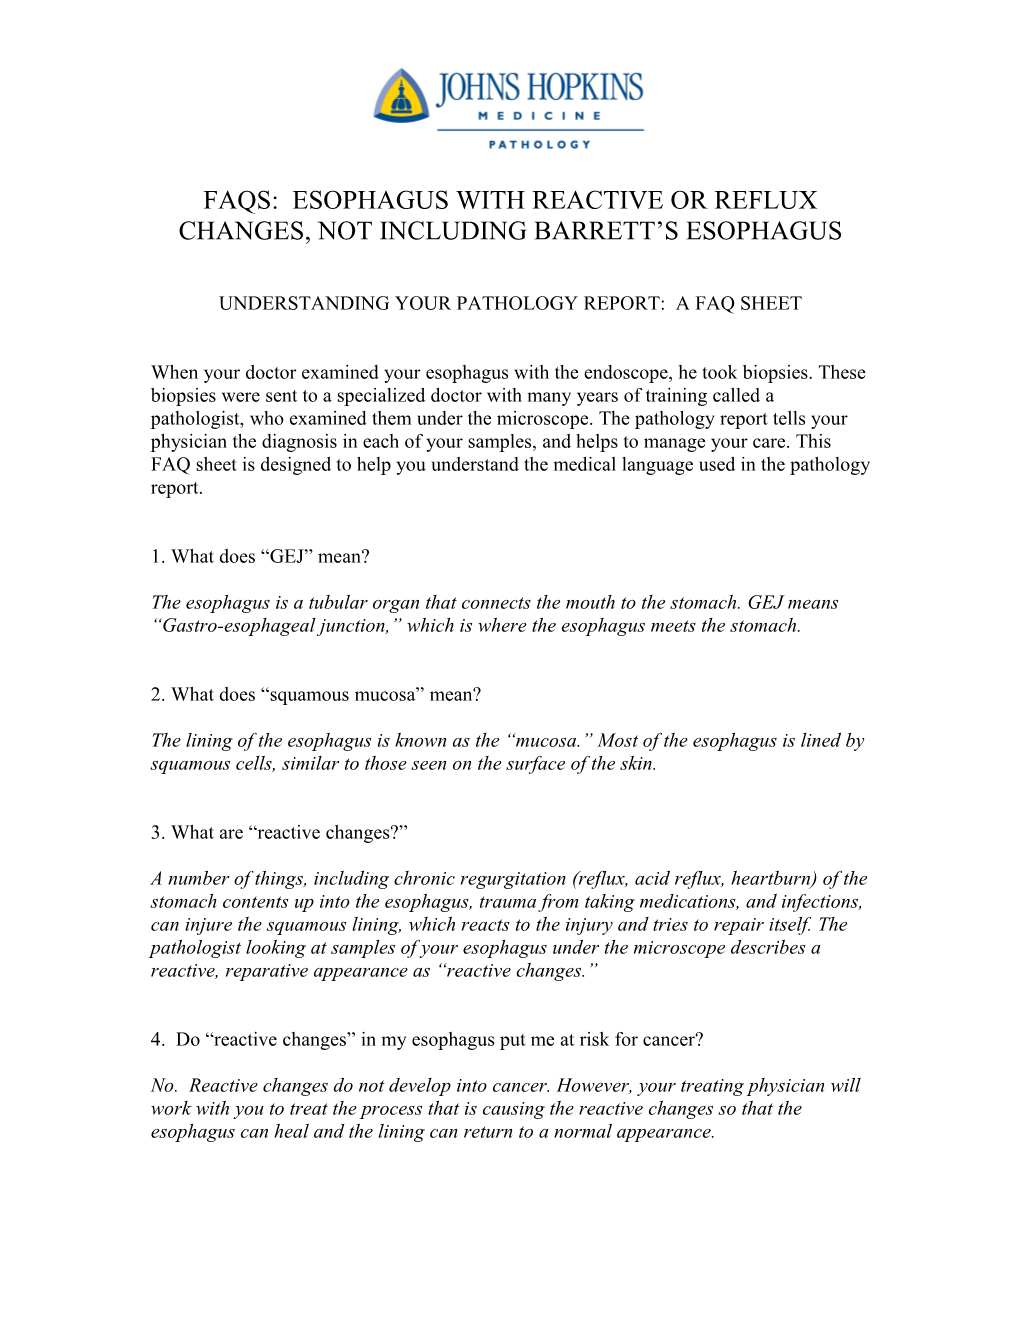 Faqs: Esophagus With Reactive Or Reflux Changes (No Barretts)